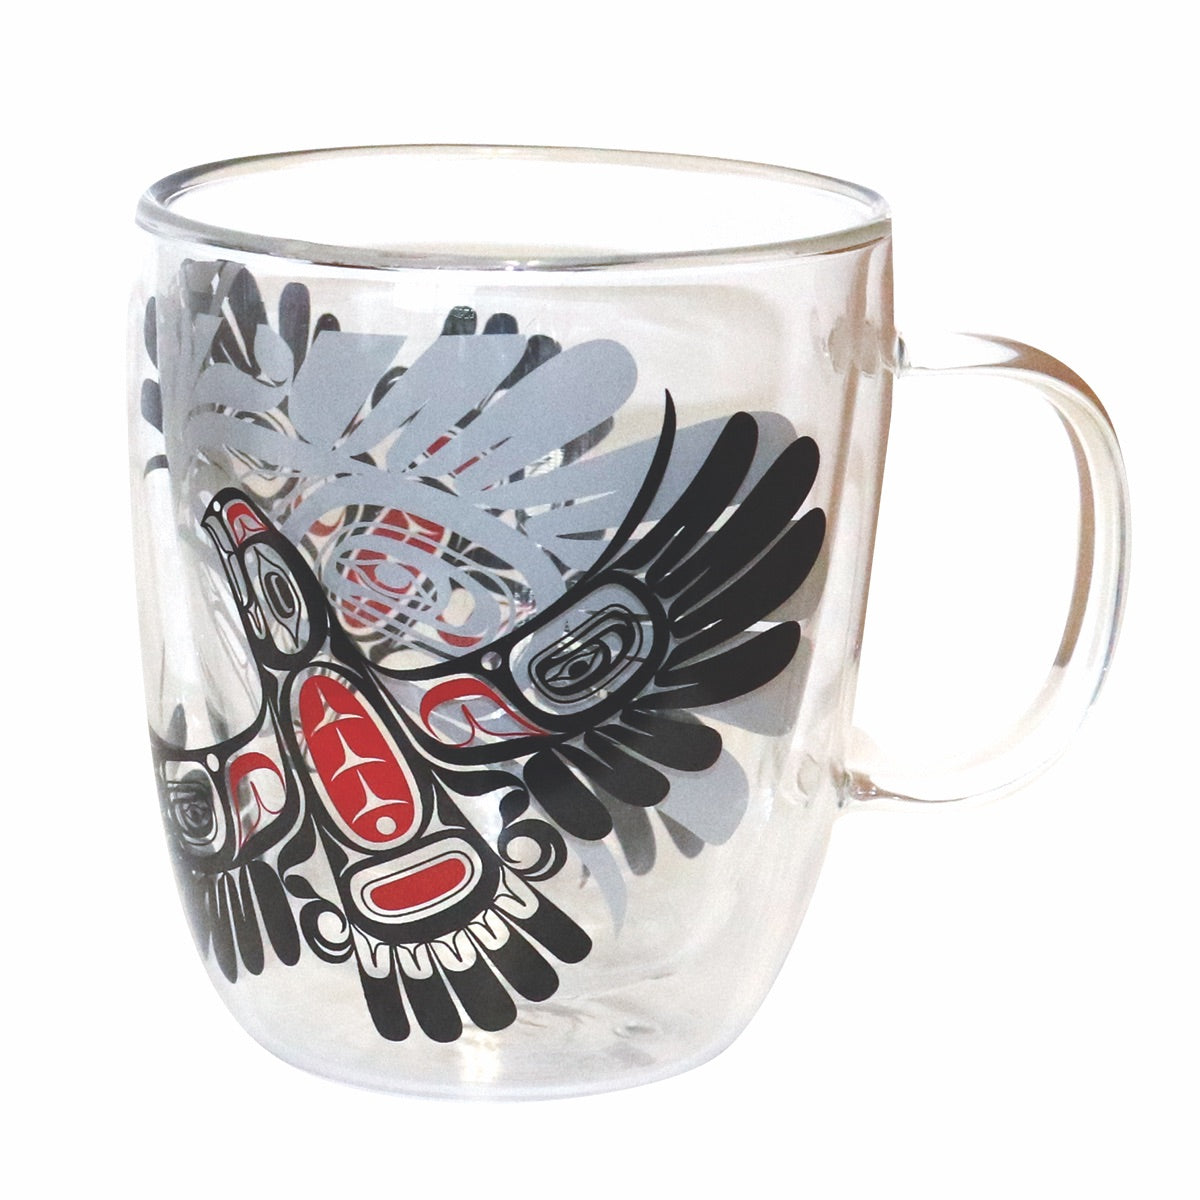 DOUBLE-WALLED GLASS MUGS - 12oz / Eagle's First Flight - GMUG13 - House of Himwitsa Native Art Gallery and Gifts